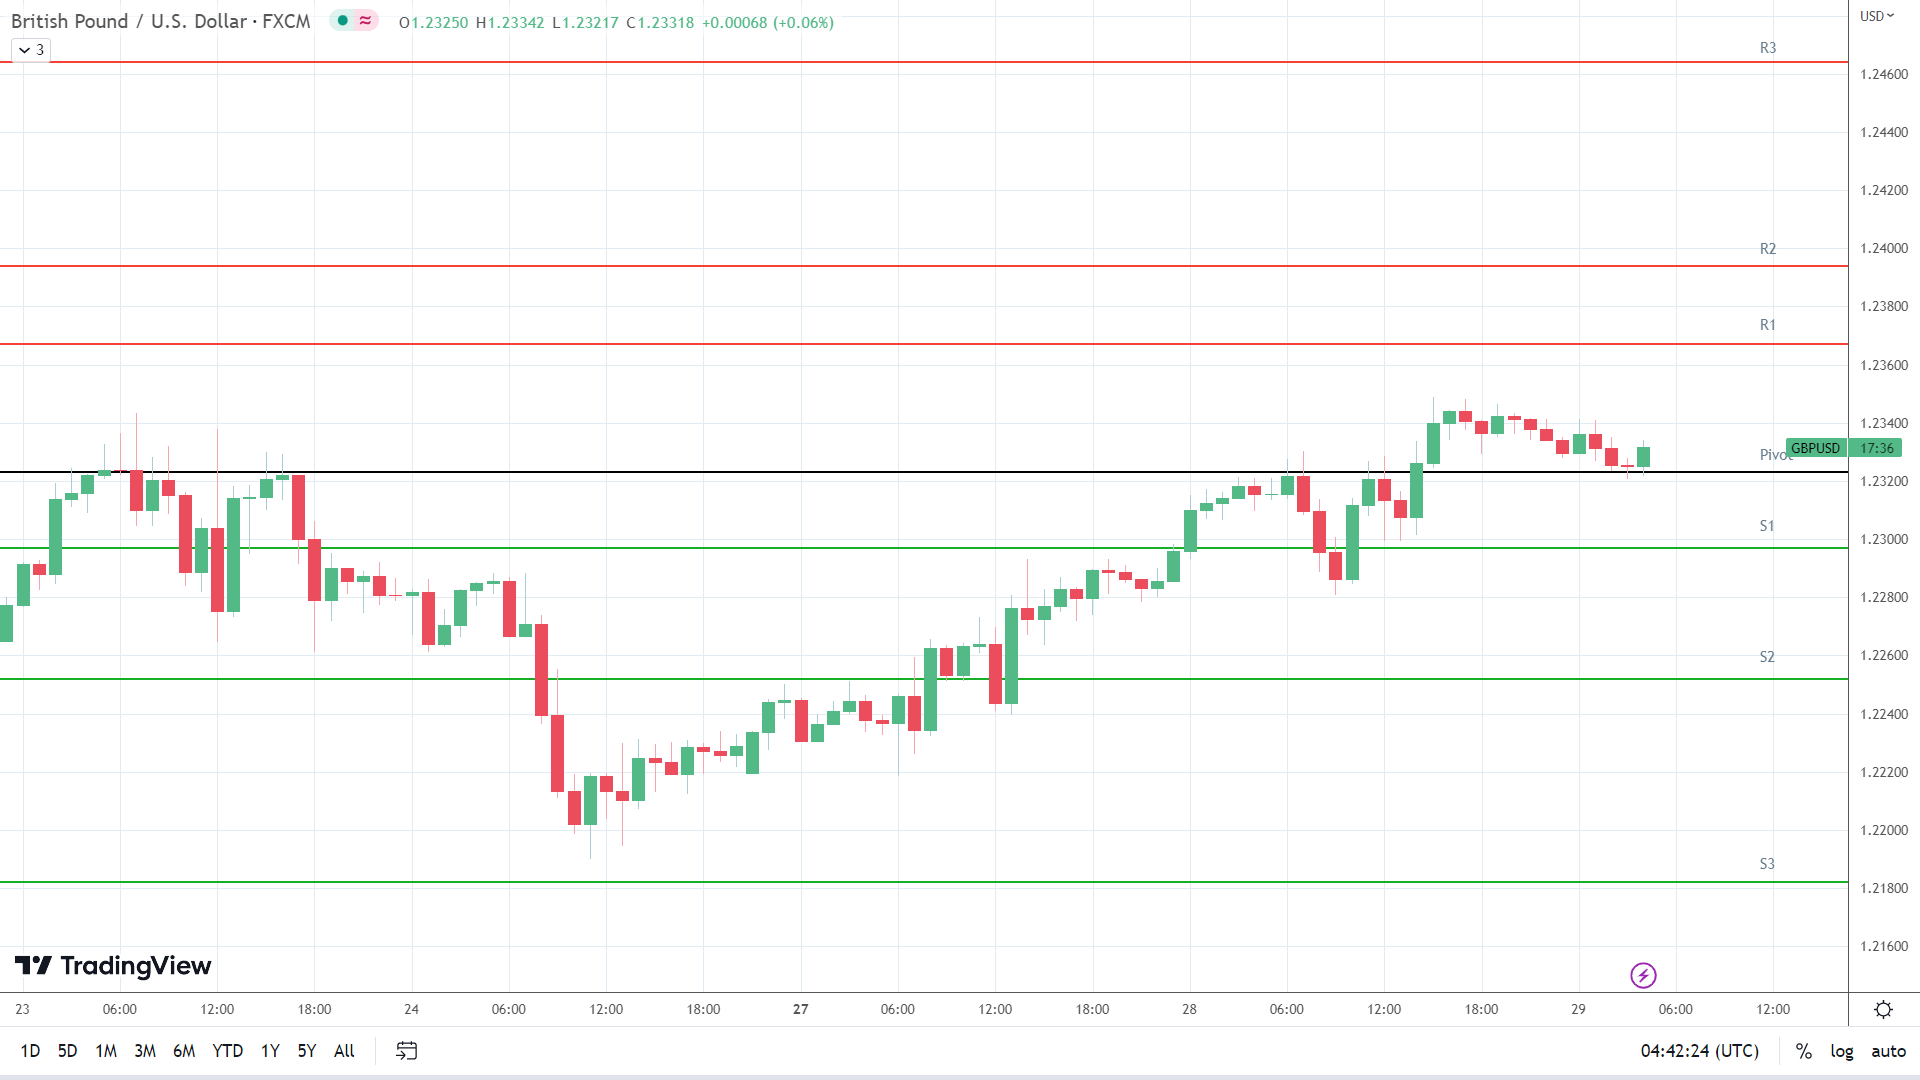 GBP to USD resistance levels in play above the pivot.